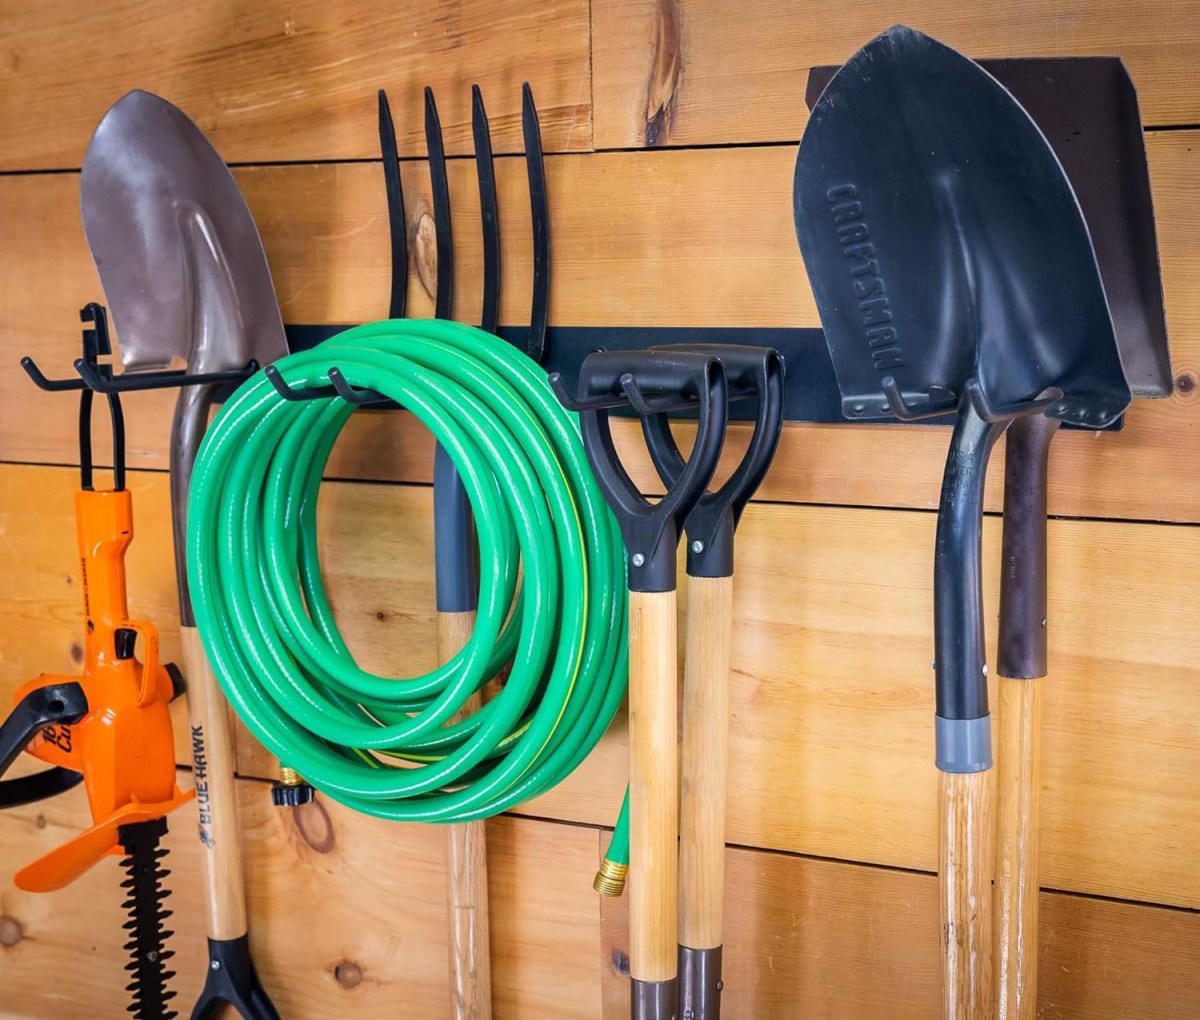 The Best Organizers for a Cluttered Garage Option Blat Tool Storage Rack